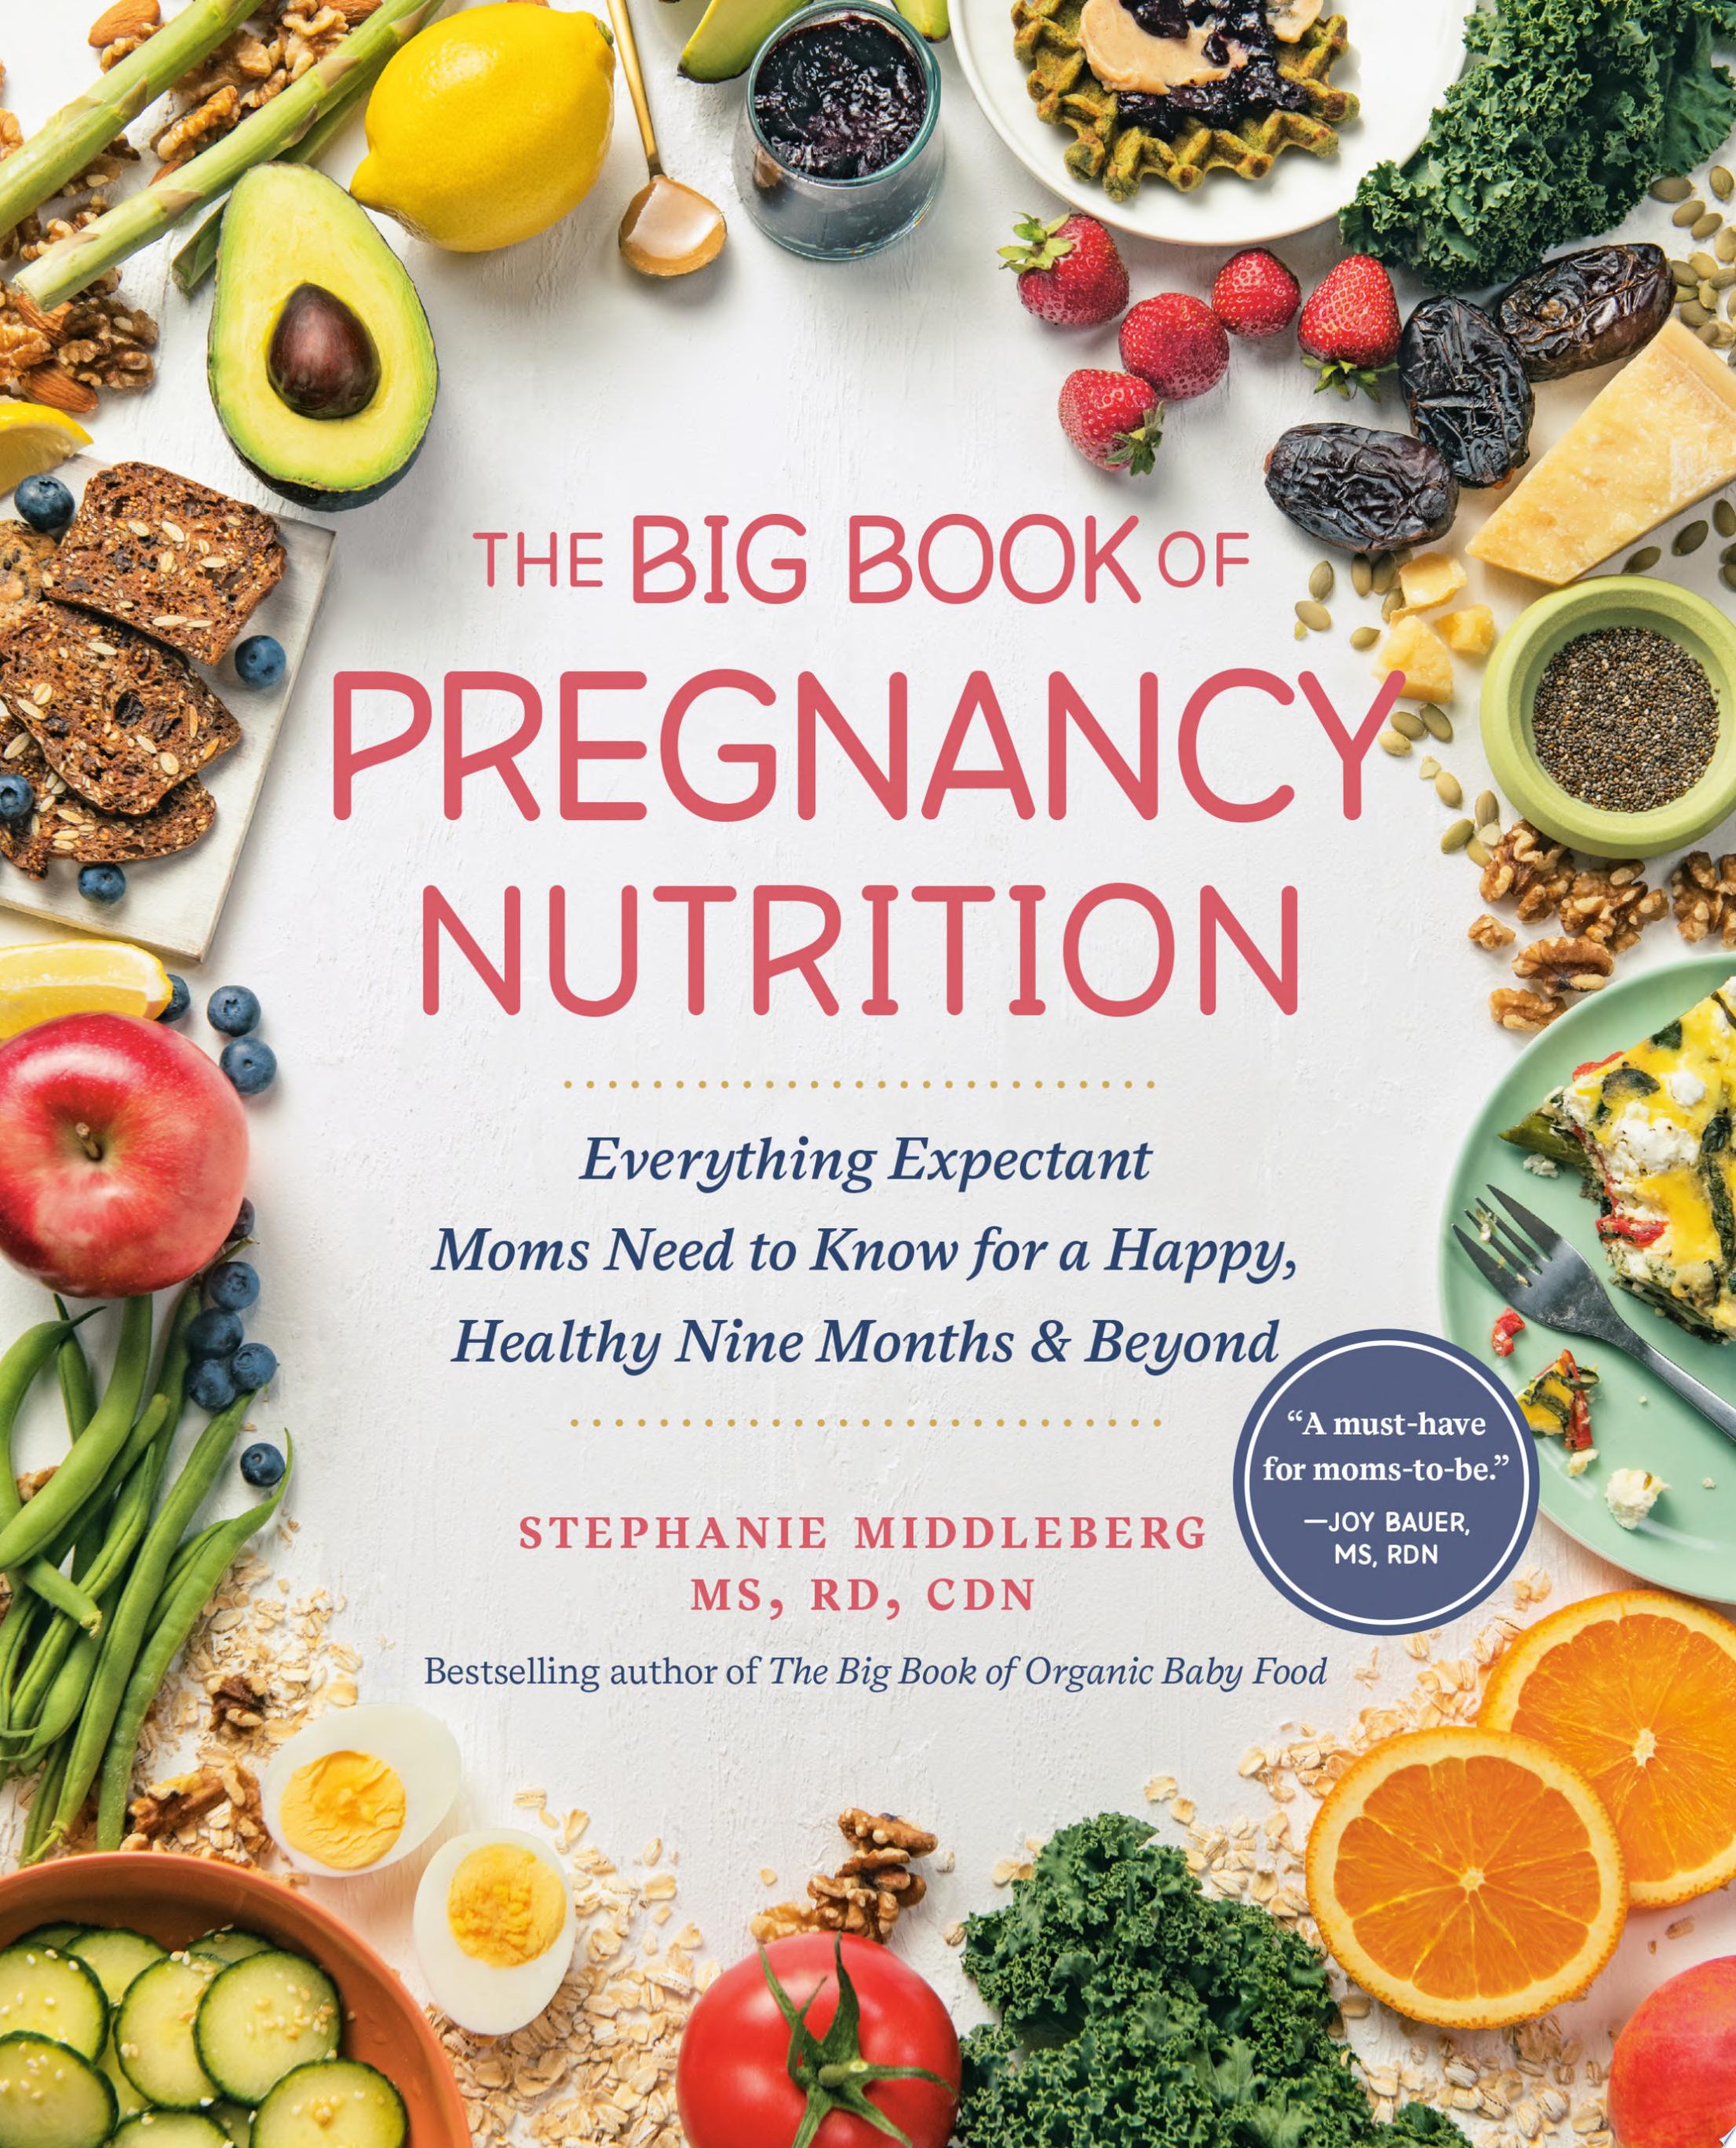 Image for "The Big Book of Pregnancy Nutrition"